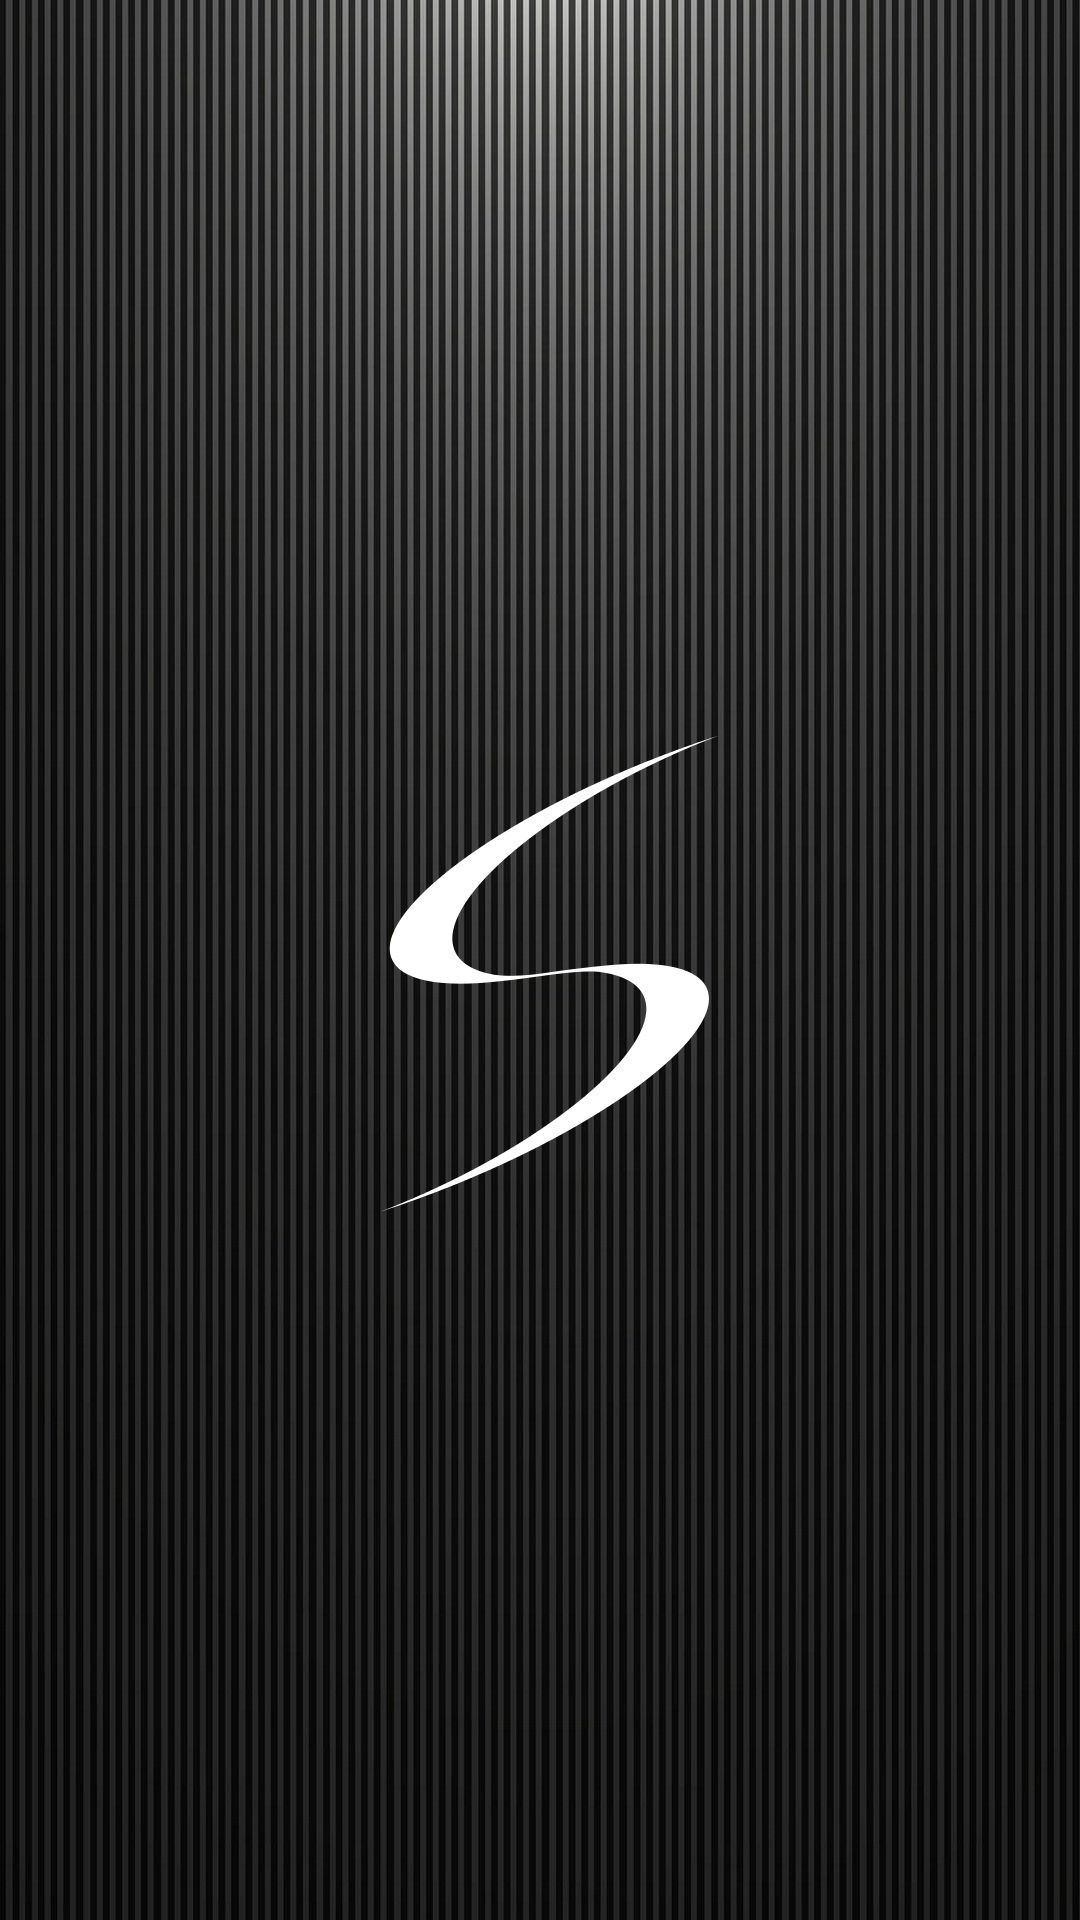 1080x1920 Samsung Logo Wallpaper posted by Ethan Peltier